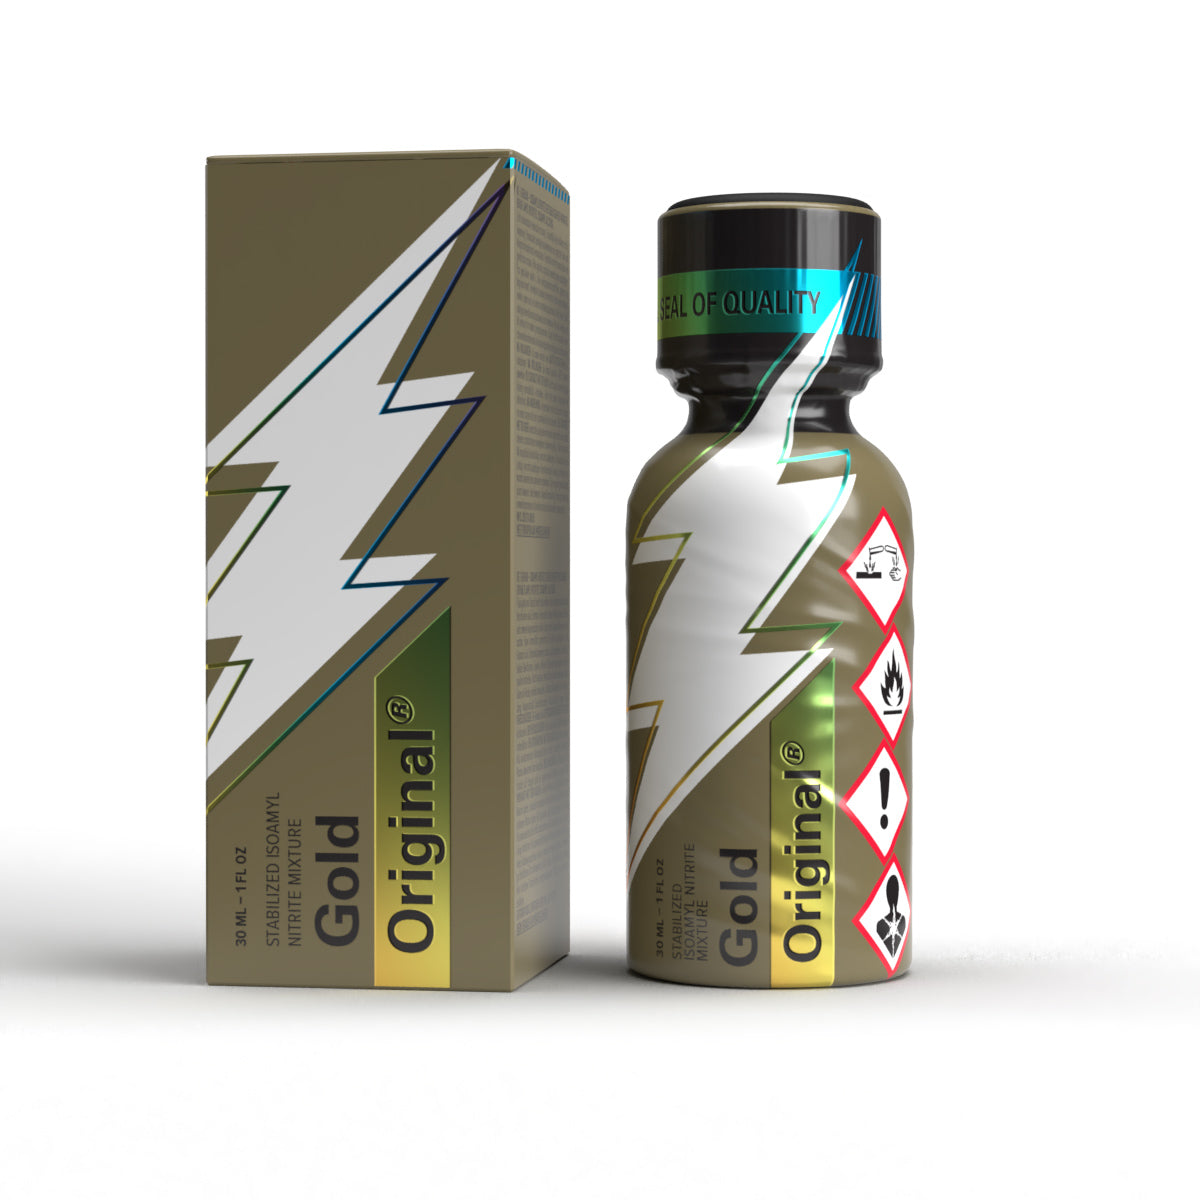 A product photo of a 30ml bottle of Original Gold poppers.